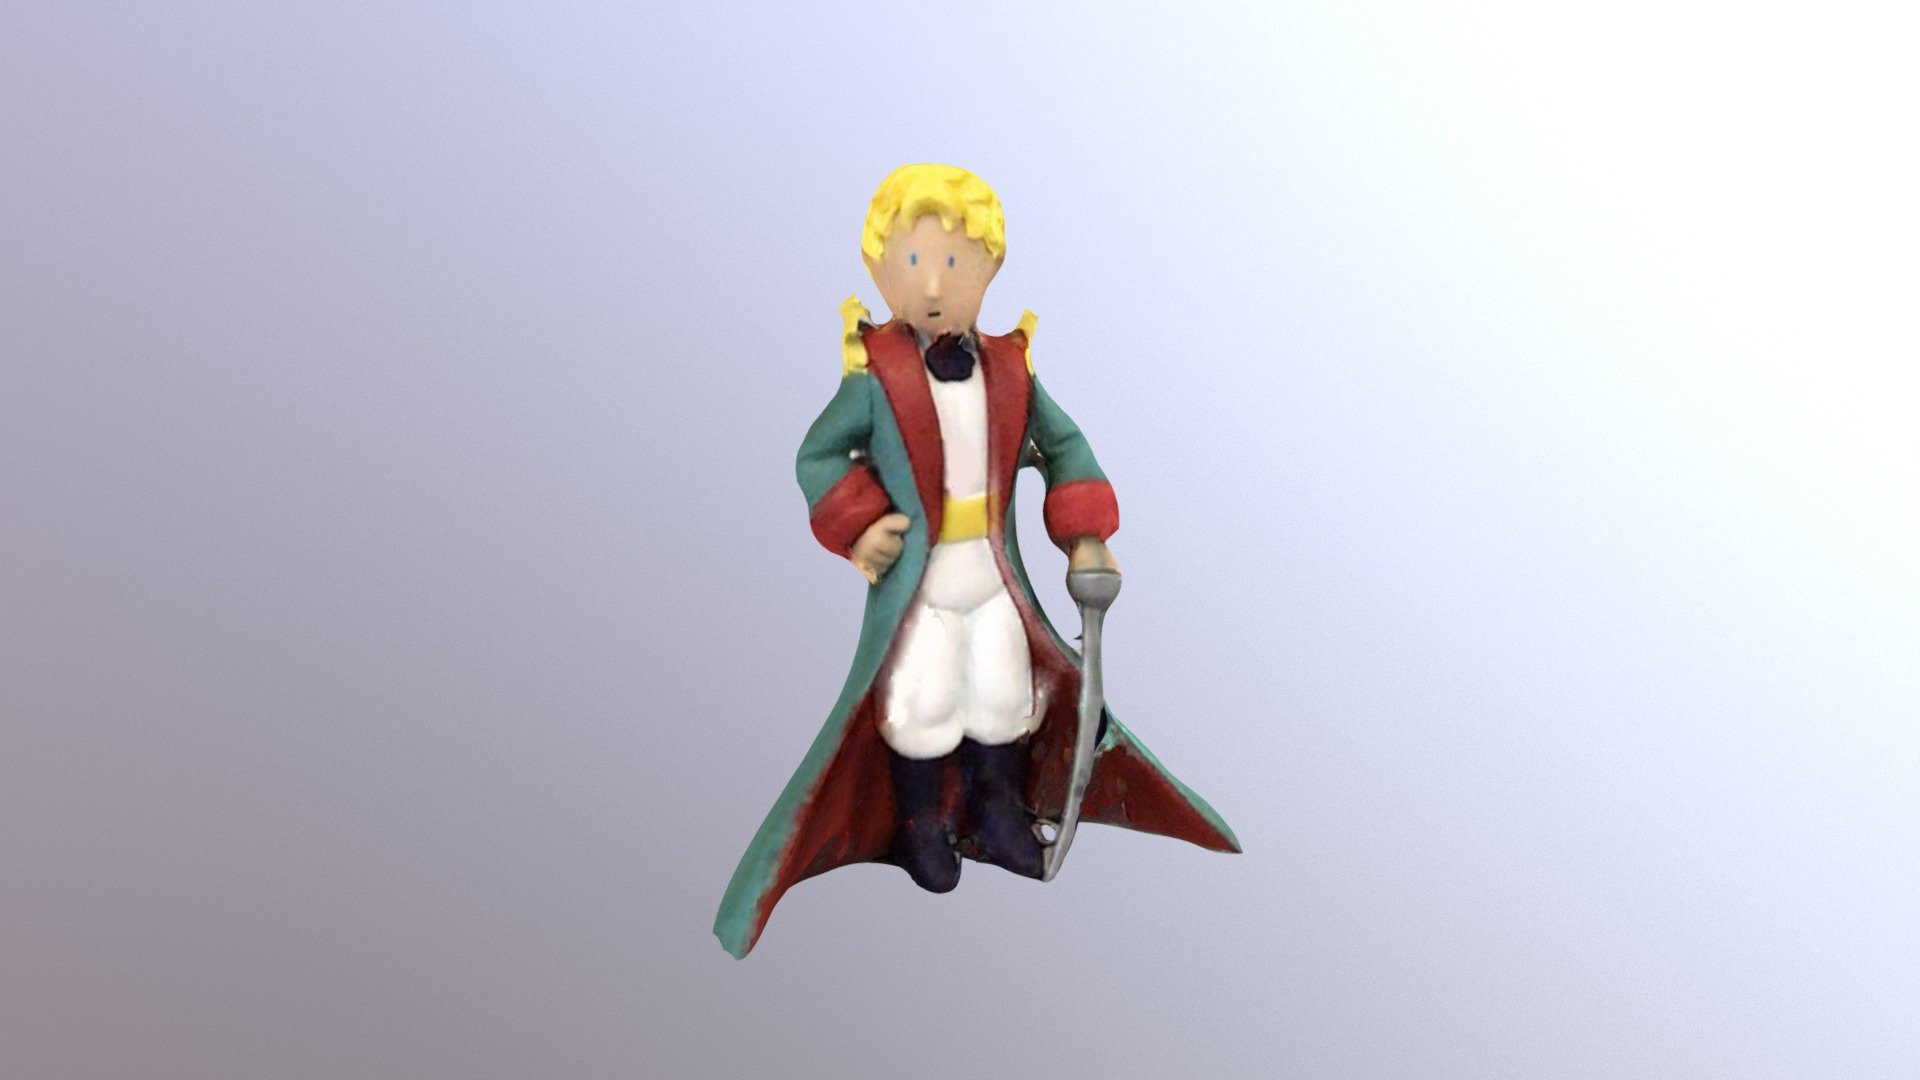 Little Prince - Download Free 3D Model By Ronen (@Ronenh) [6Db812F]